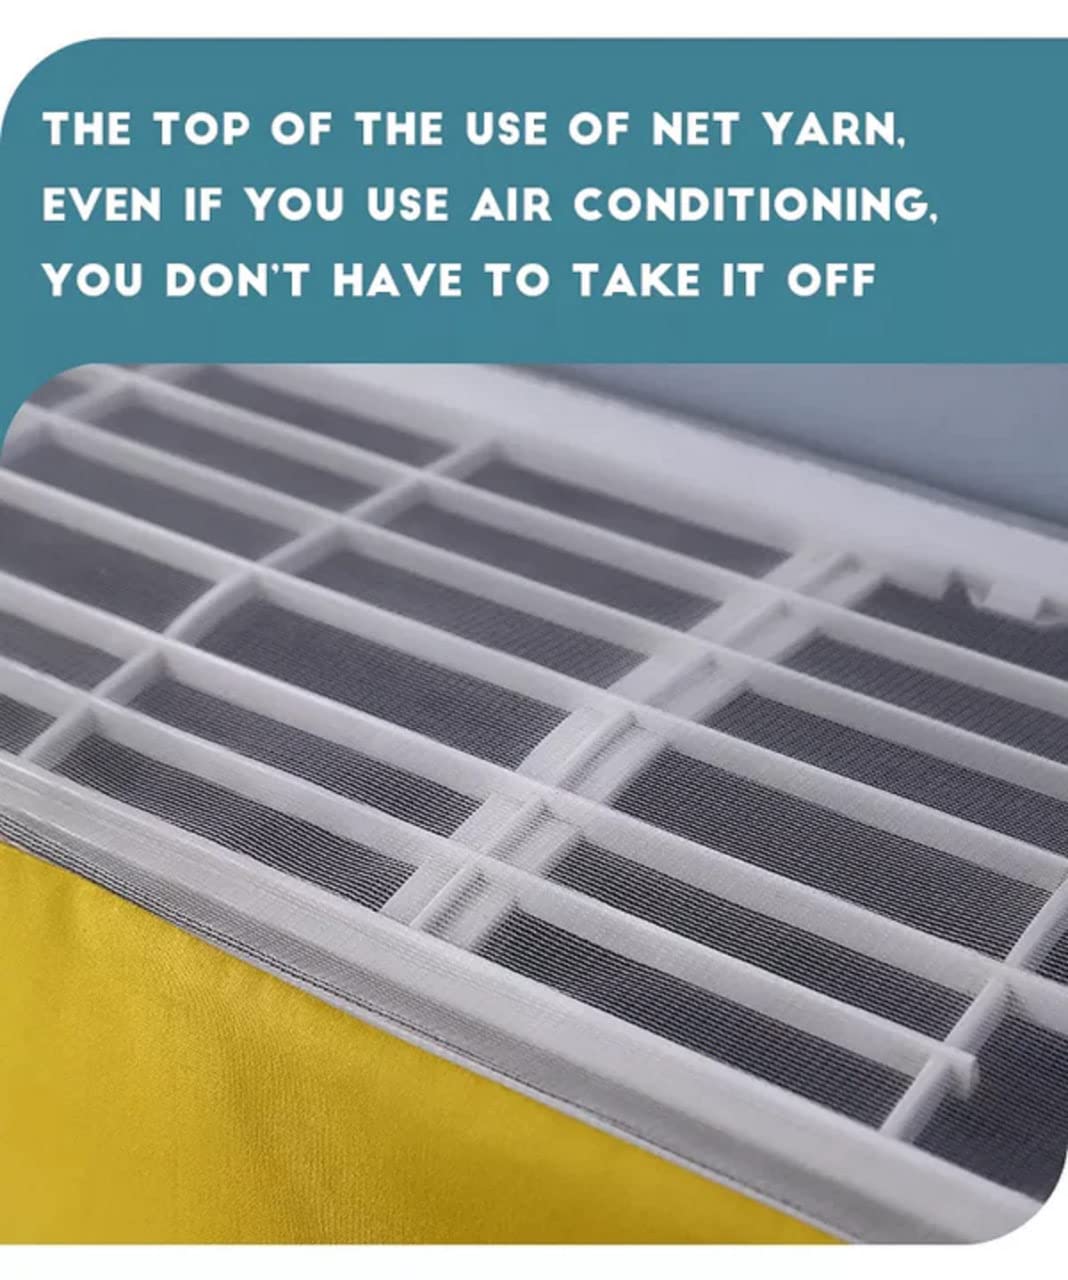 AC Dust Protection - Keep Your Unit Clean and Efficient